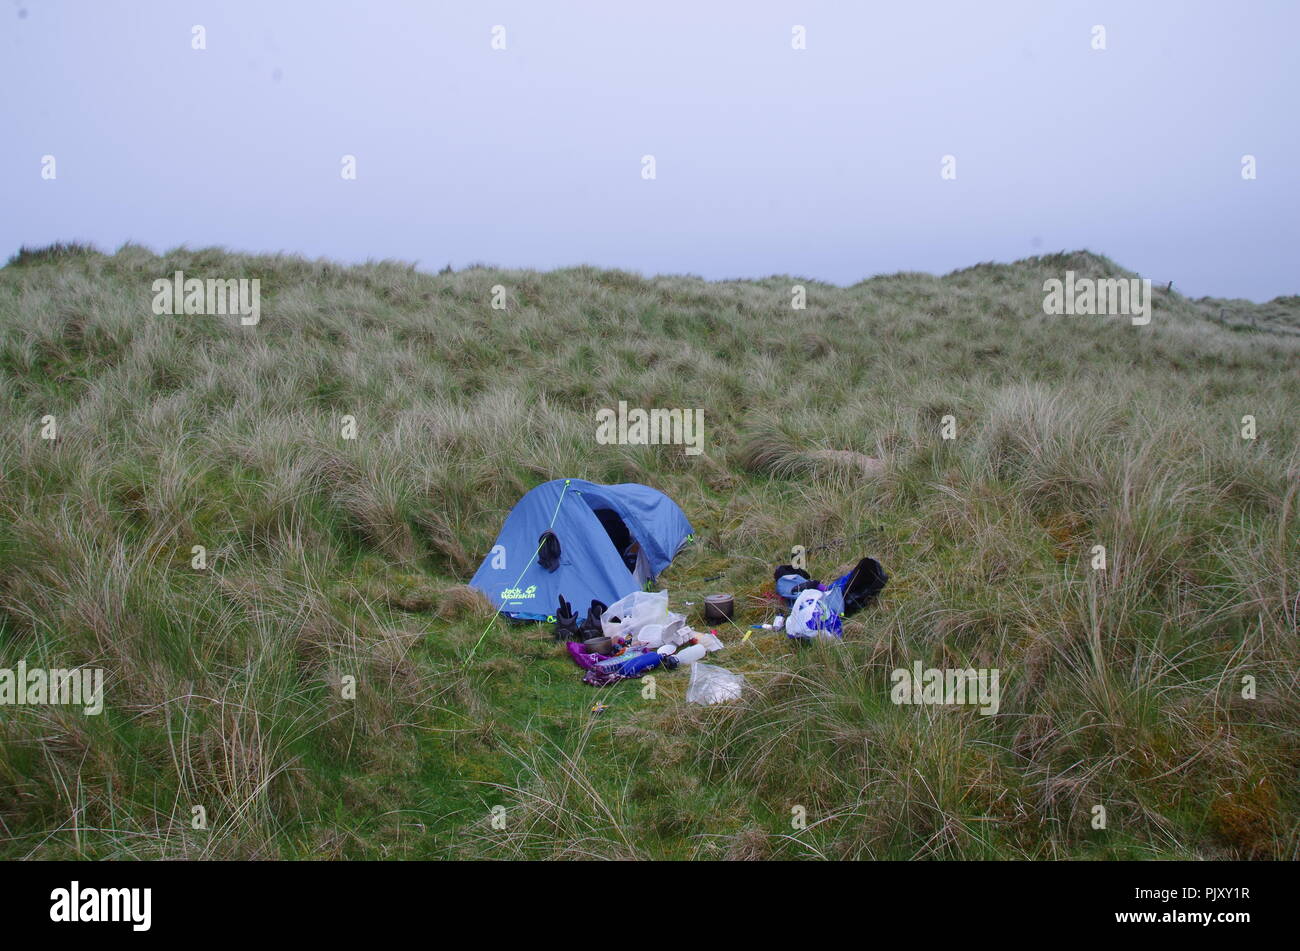 Camping sauvage. Sinclairs Bay. John O' Groats (Duncansby Head) aux terres fin. Cornwall. Sentier de bout en bout. Caithness. L'Écosse. UK Banque D'Images